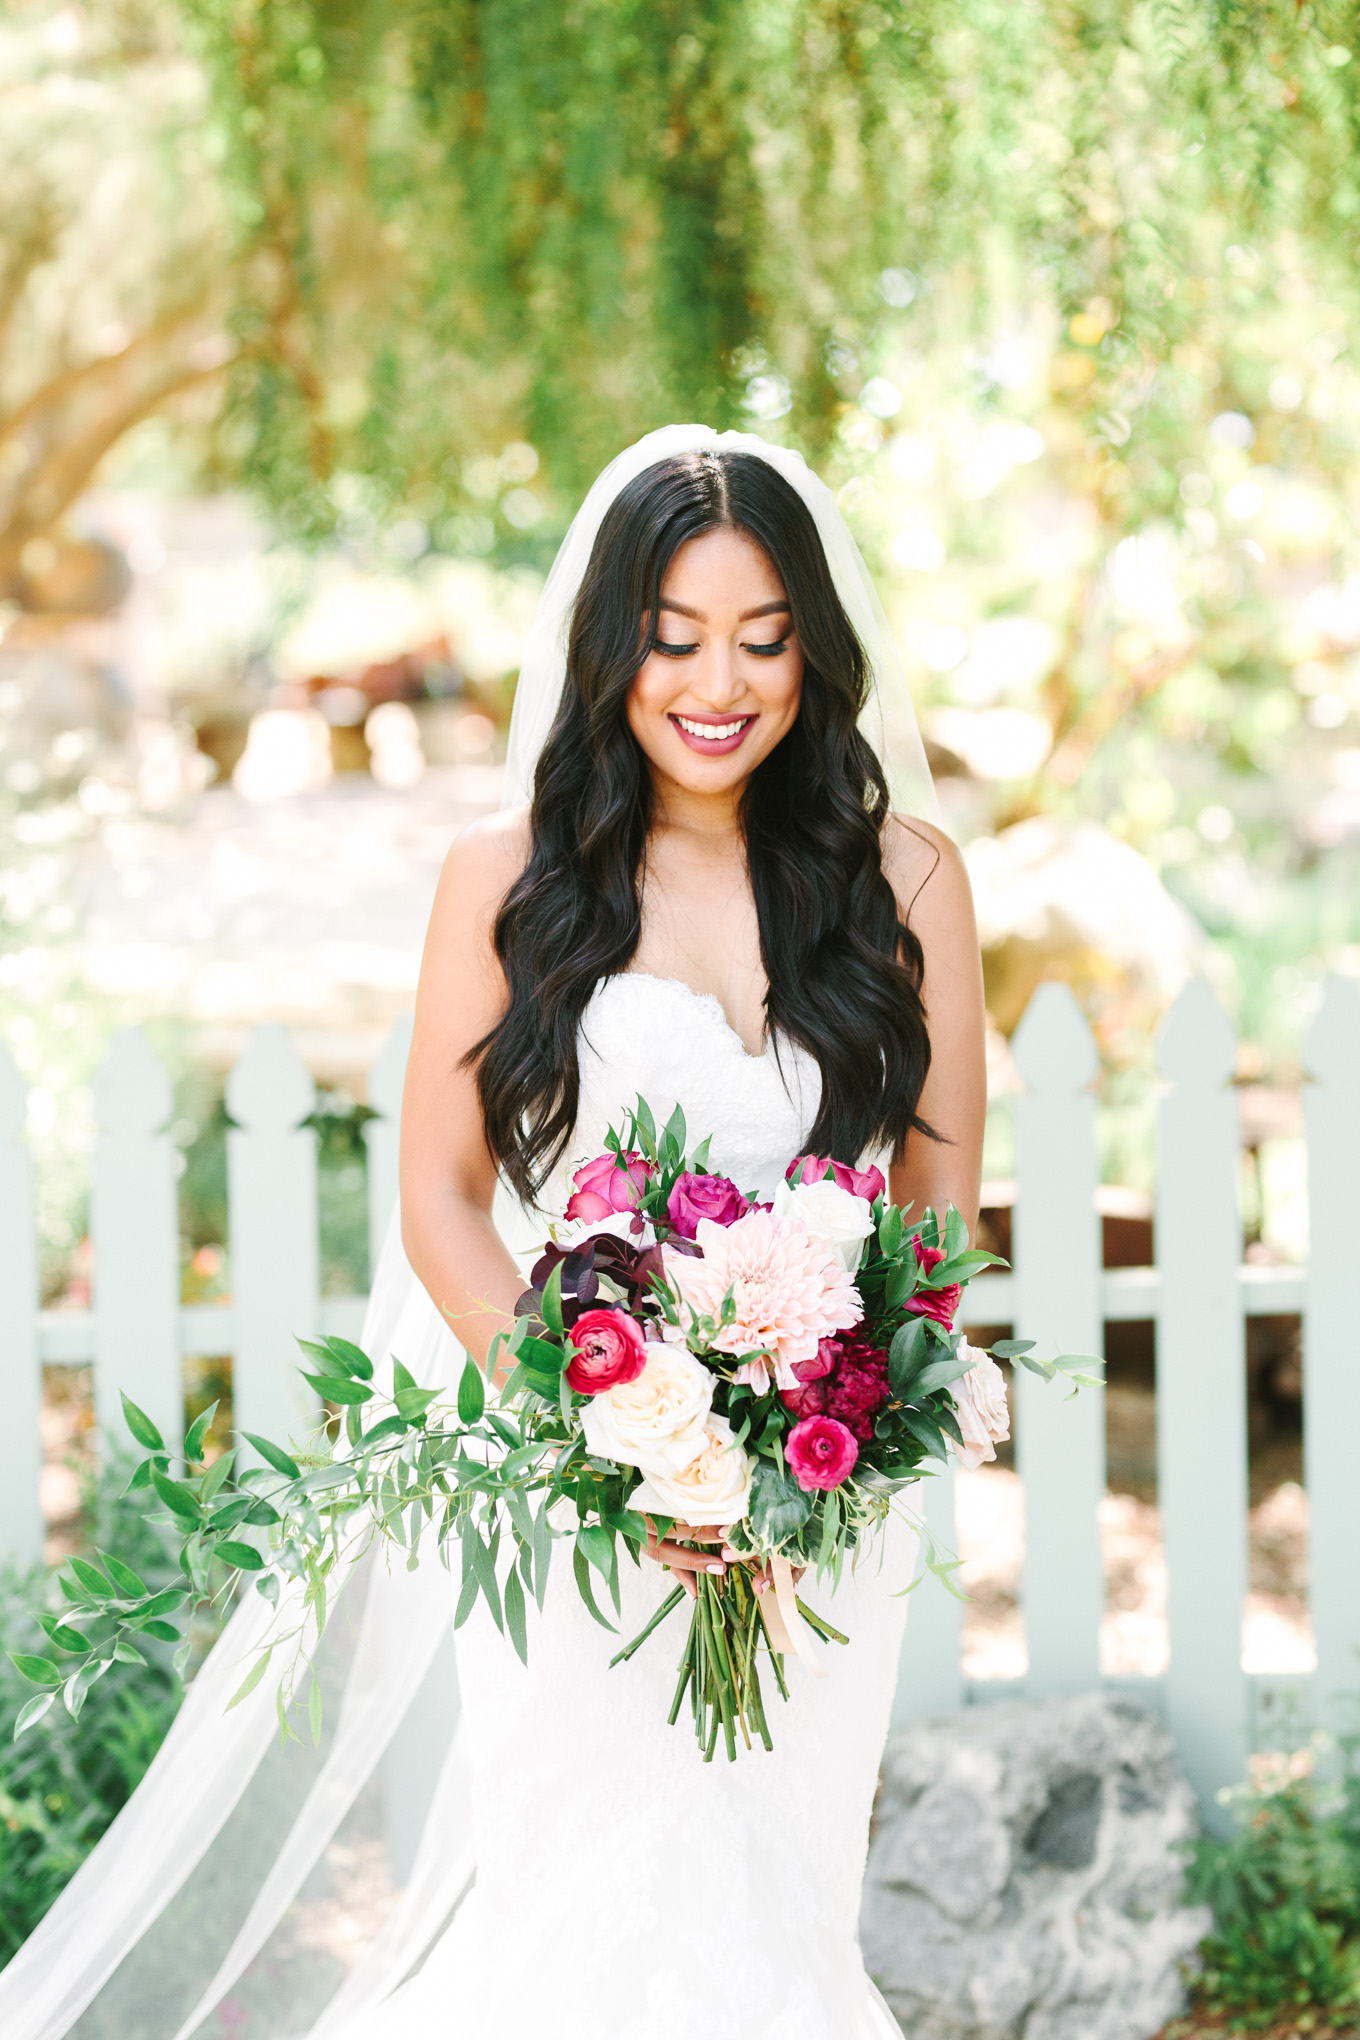 Bride at Maravilla Gardens wedding | Best Southern California Garden Wedding Venues | Colorful and elevated wedding photography for fun-loving couples | #gardenvenue #weddingvenue #socalweddingvenue #bouquetideas #uniquebouquet   Source: Mary Costa Photography | Los Angeles 